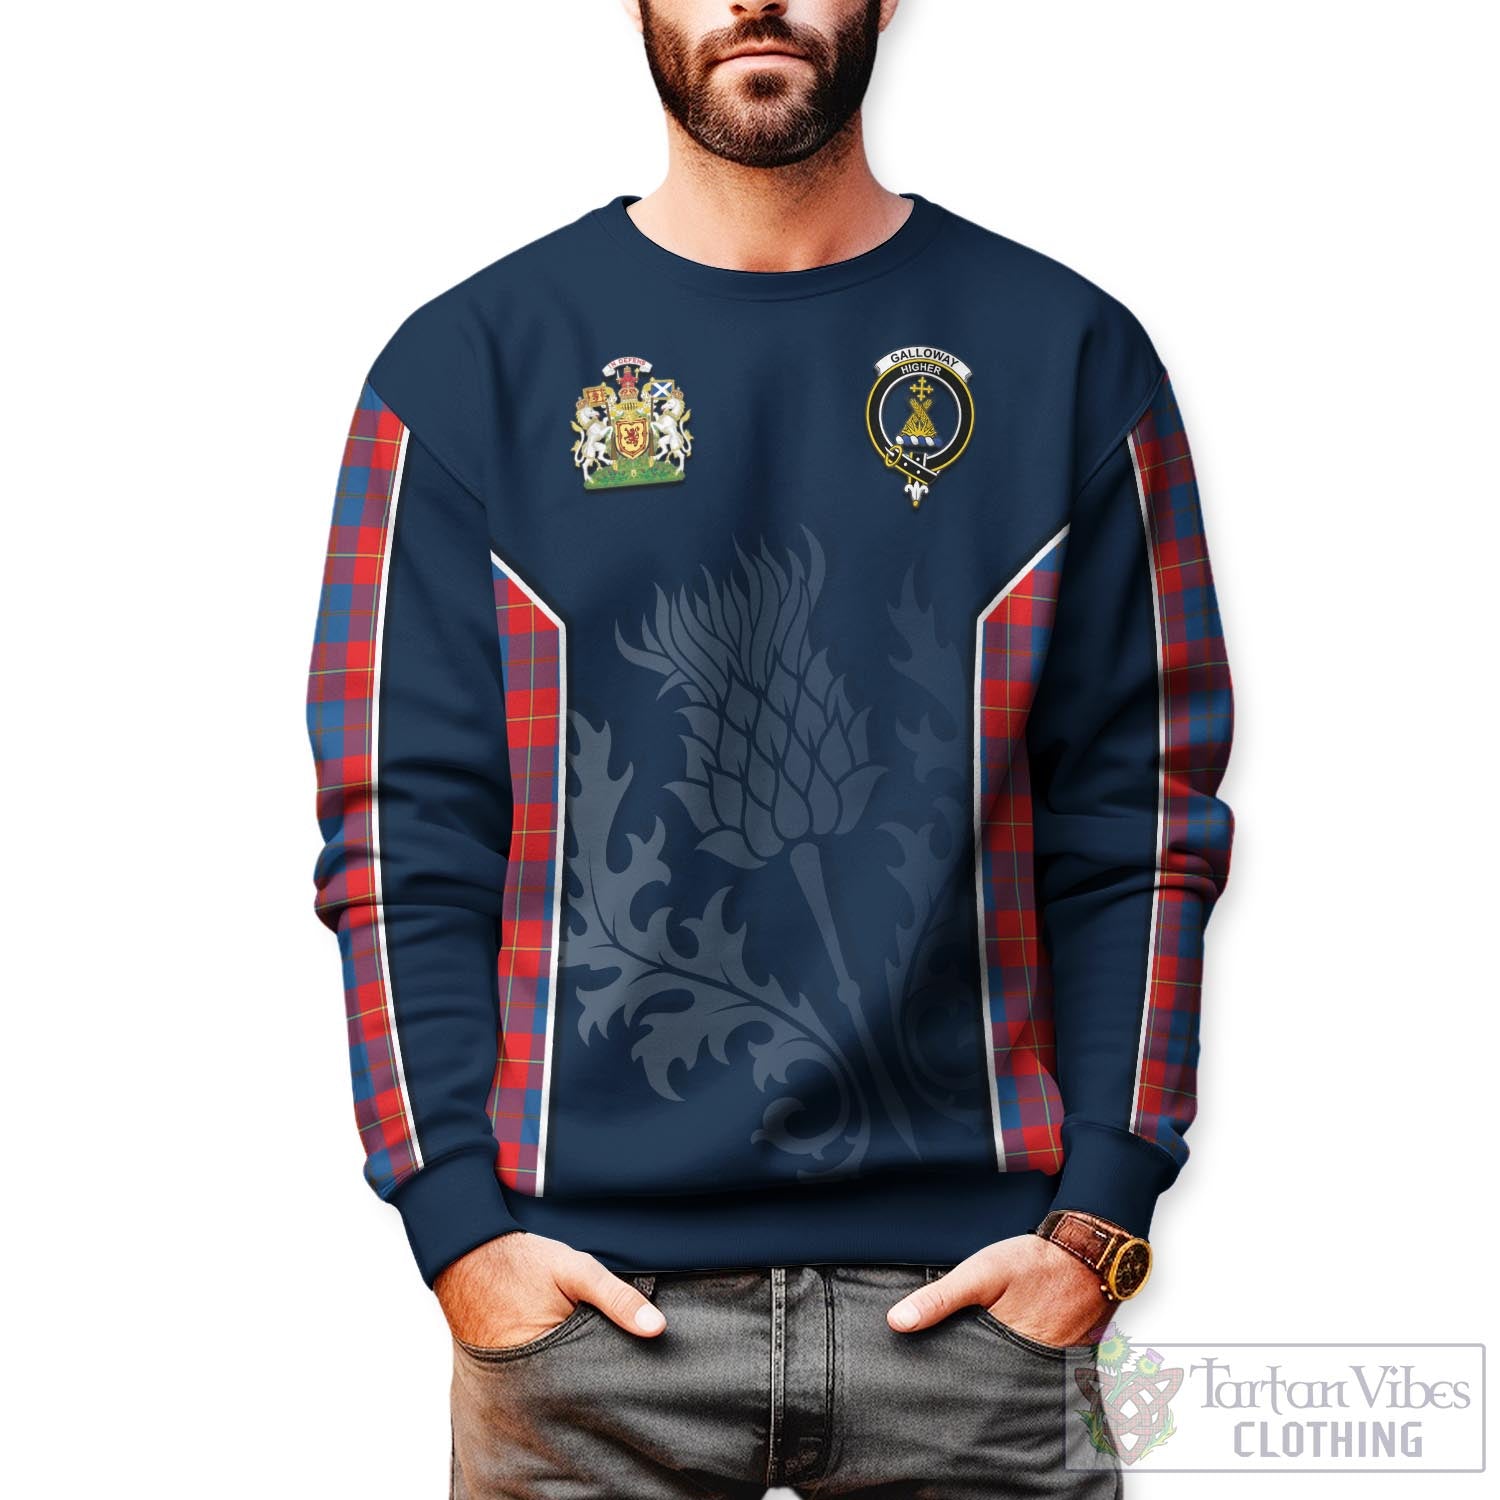 Tartan Vibes Clothing Galloway Red Tartan Sweatshirt with Family Crest and Scottish Thistle Vibes Sport Style